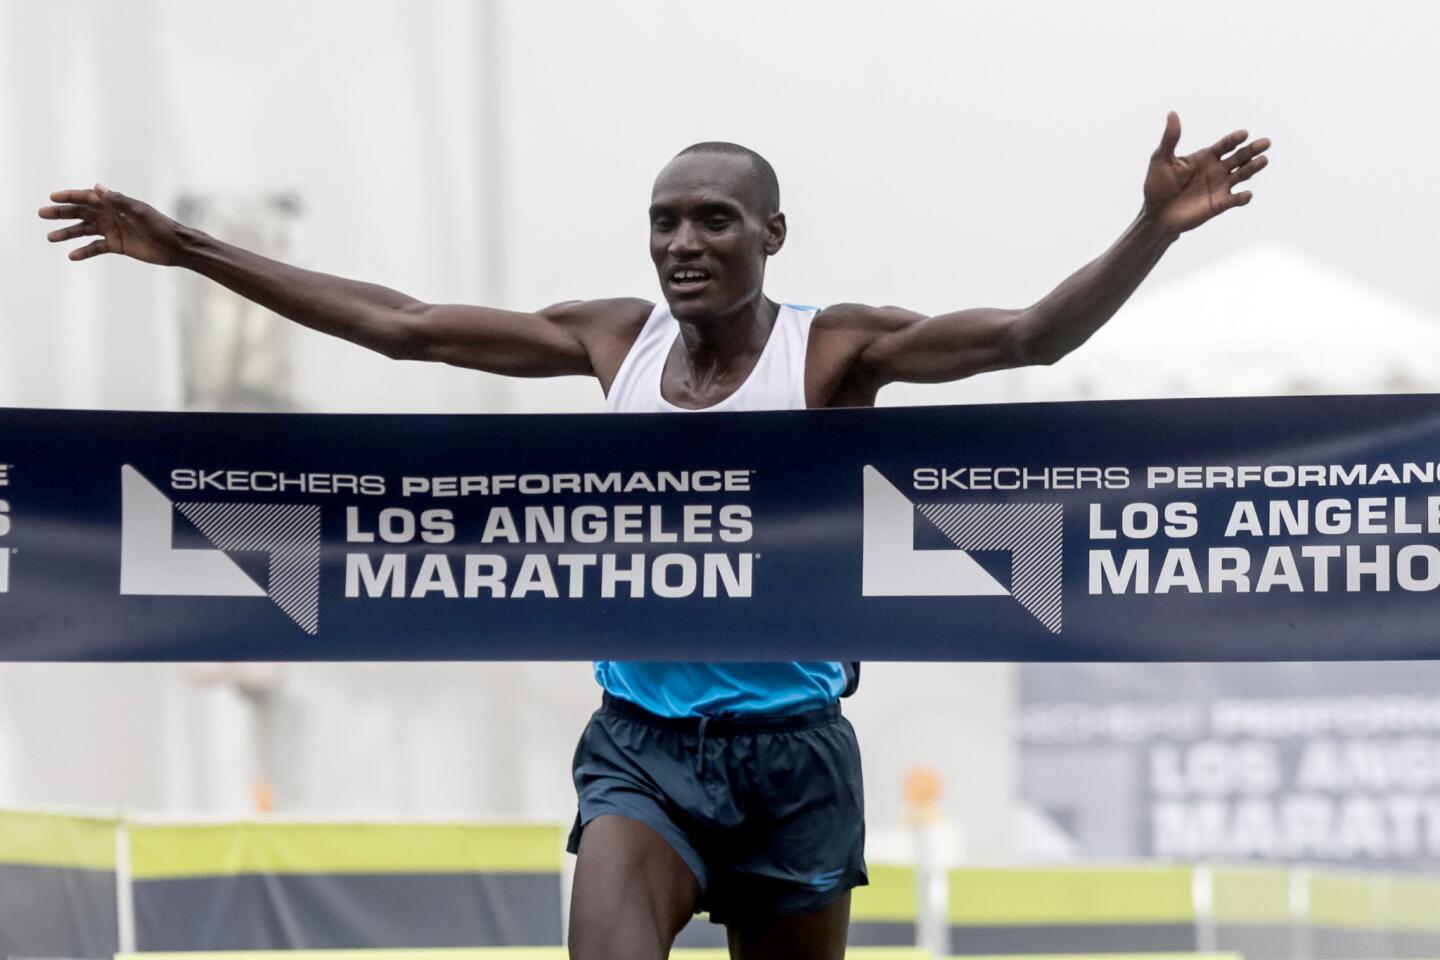 Weldon Kirui of Kenya crosses the finish line to win the L.A. Marathon with an unoffical time of 2:13:05